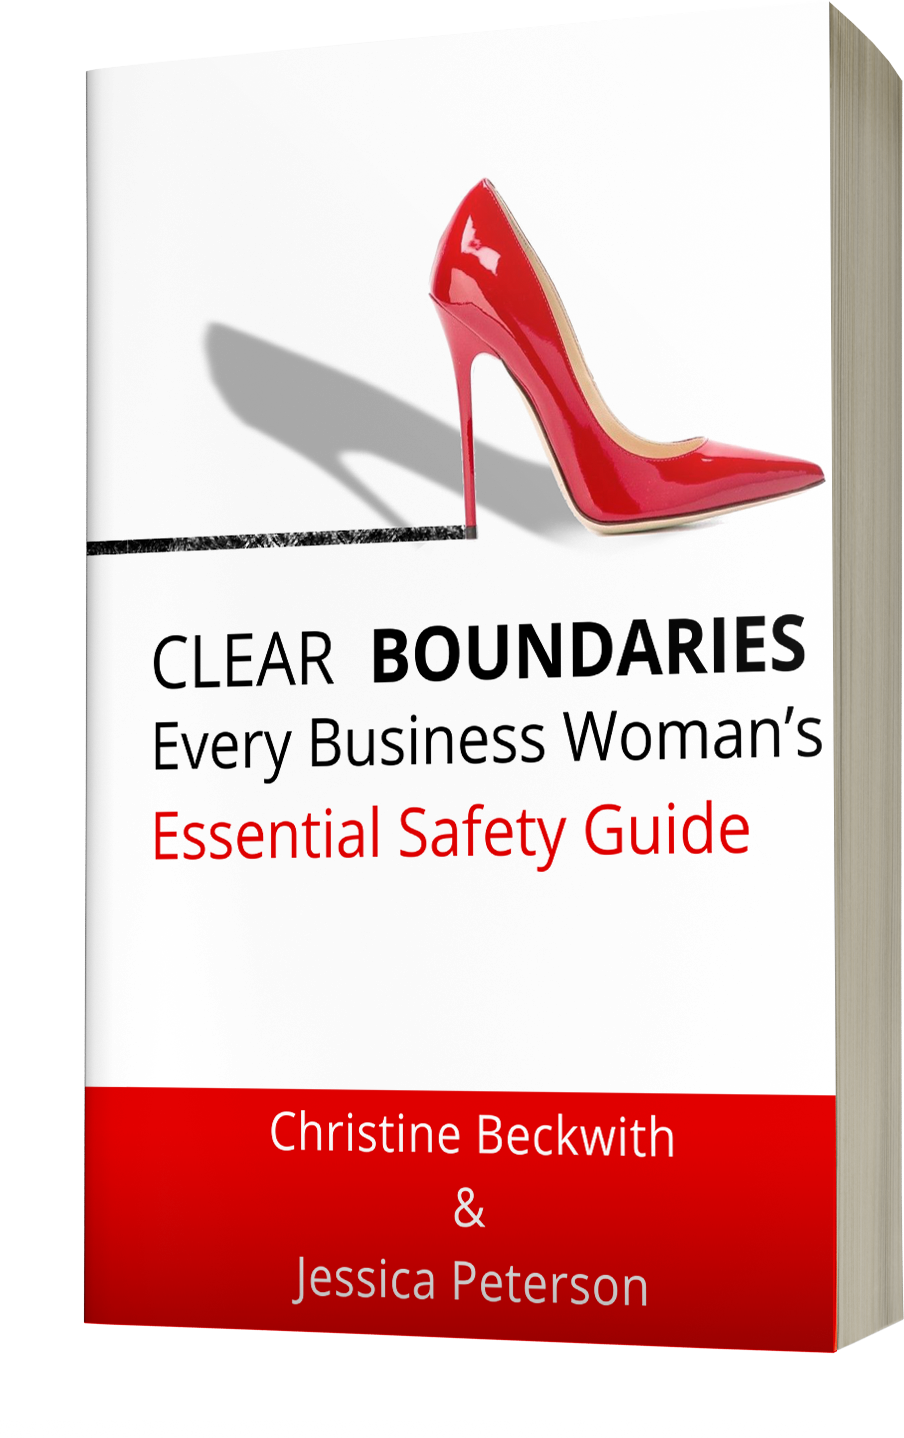 Clear Boundaries Business Woman Safety Guide Book Cover PNG image